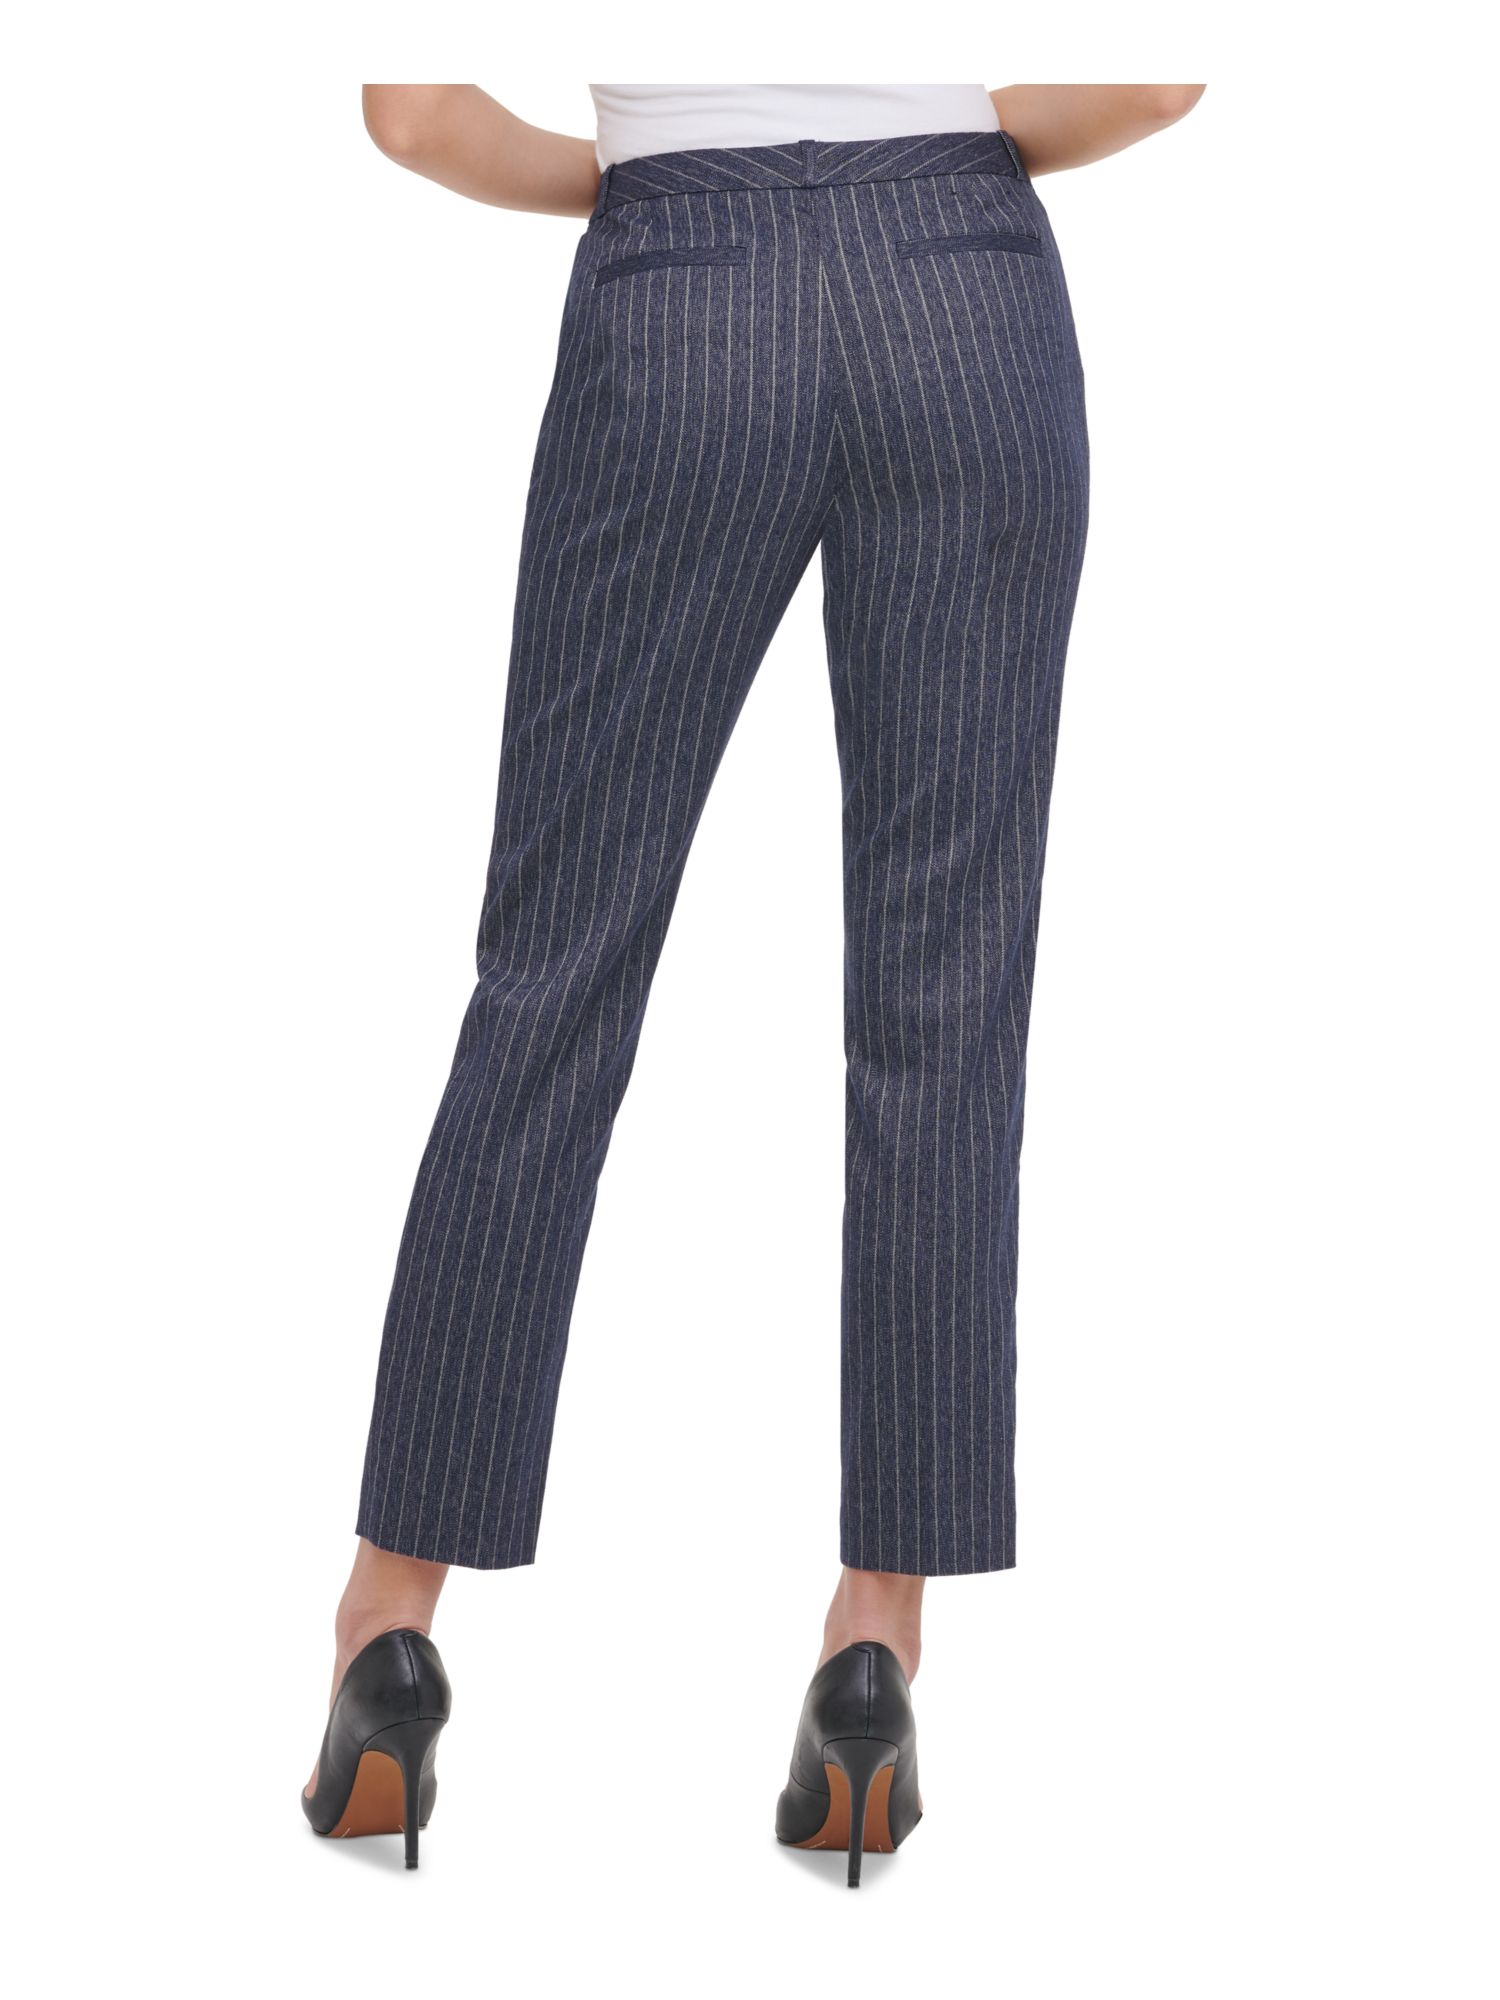 TOMMY HILFIGER Womens Navy Zippered Pinstripe Pants Size: 6 - image 2 of 4